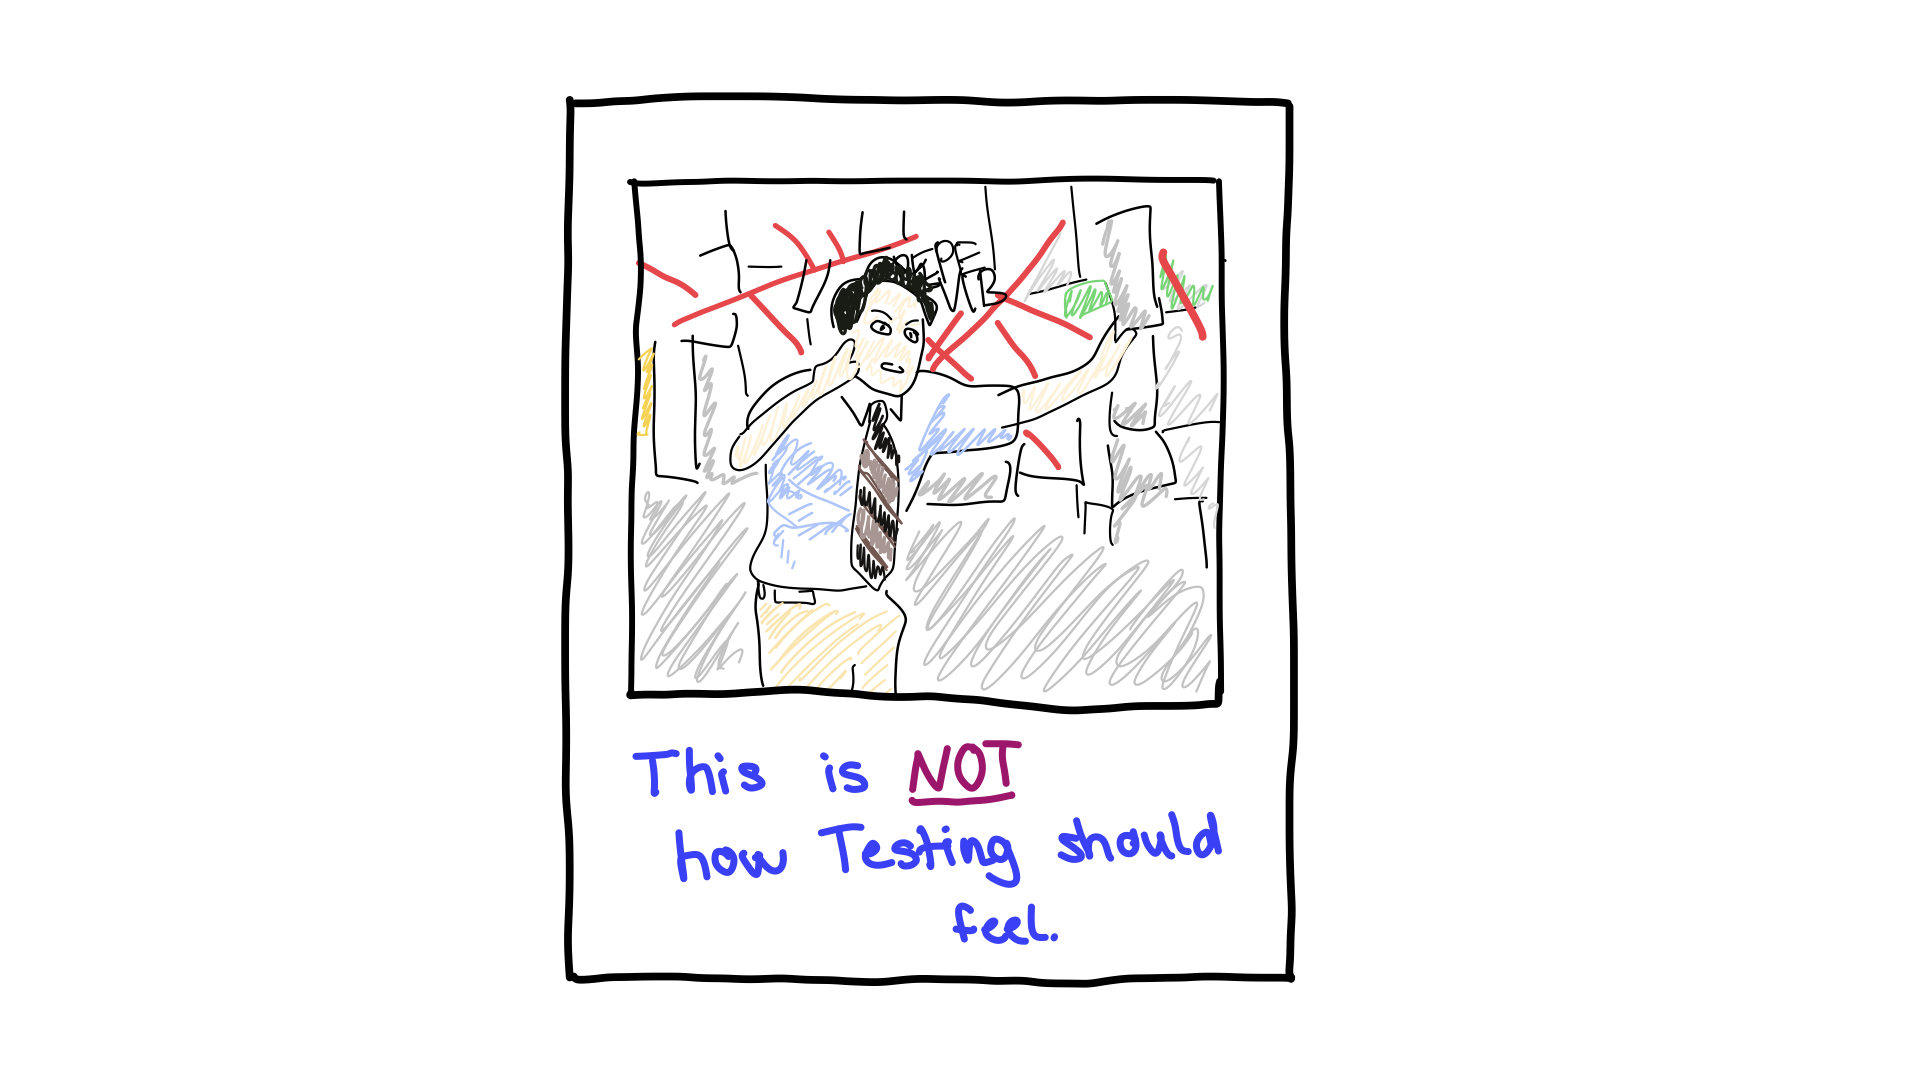 Don't make tests complex, they shouldn't feel this way.